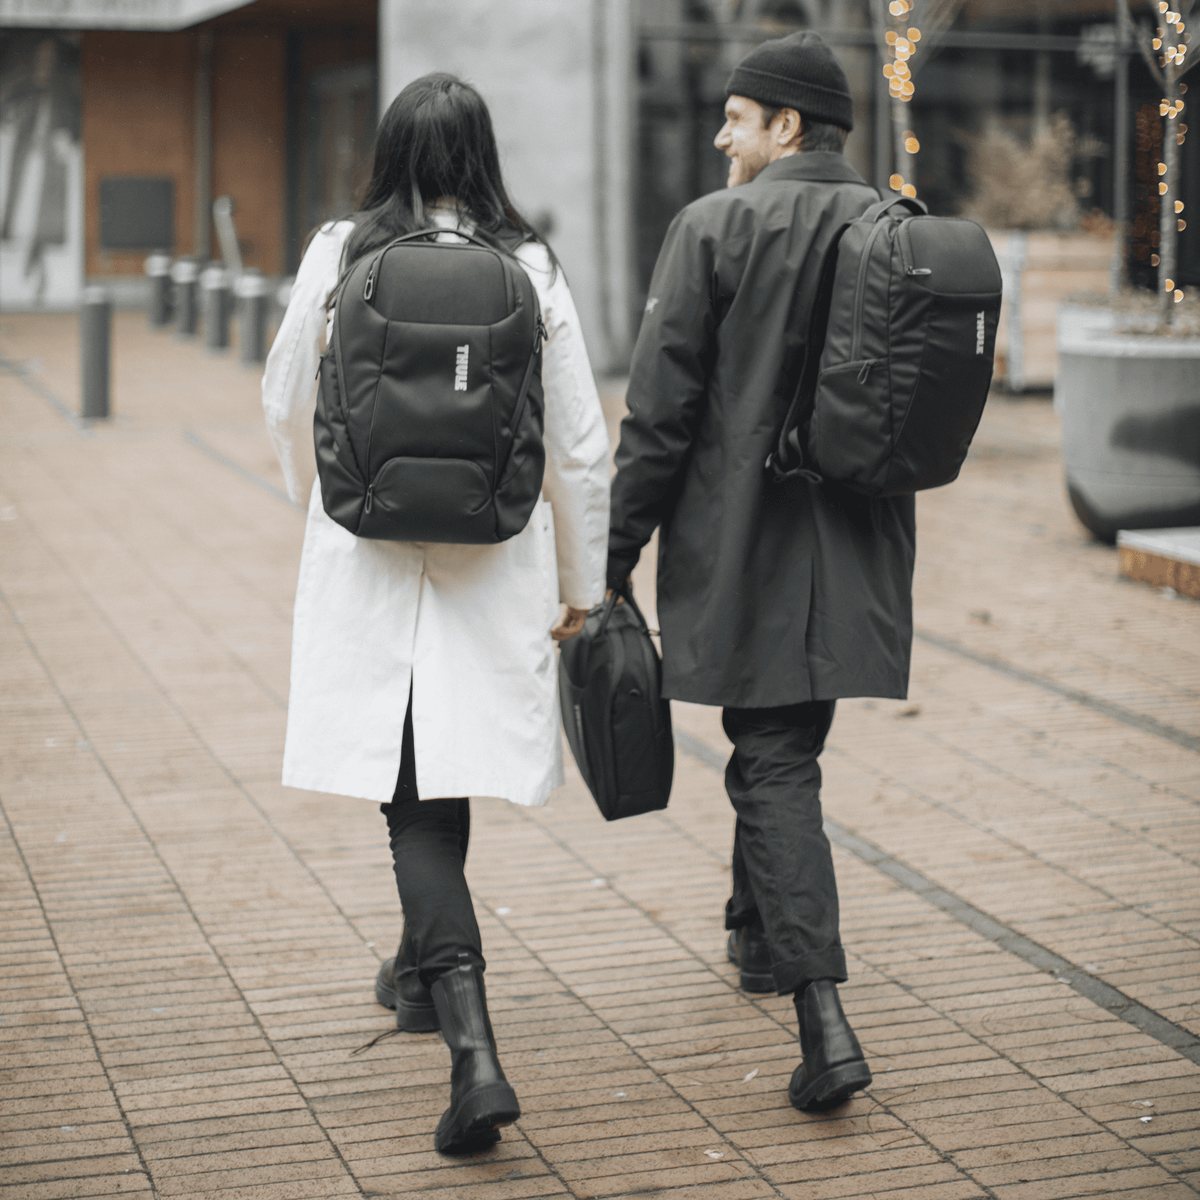 A man and a woman walk towards a glass building, chatting and carrying black Thule Accent backpacks.